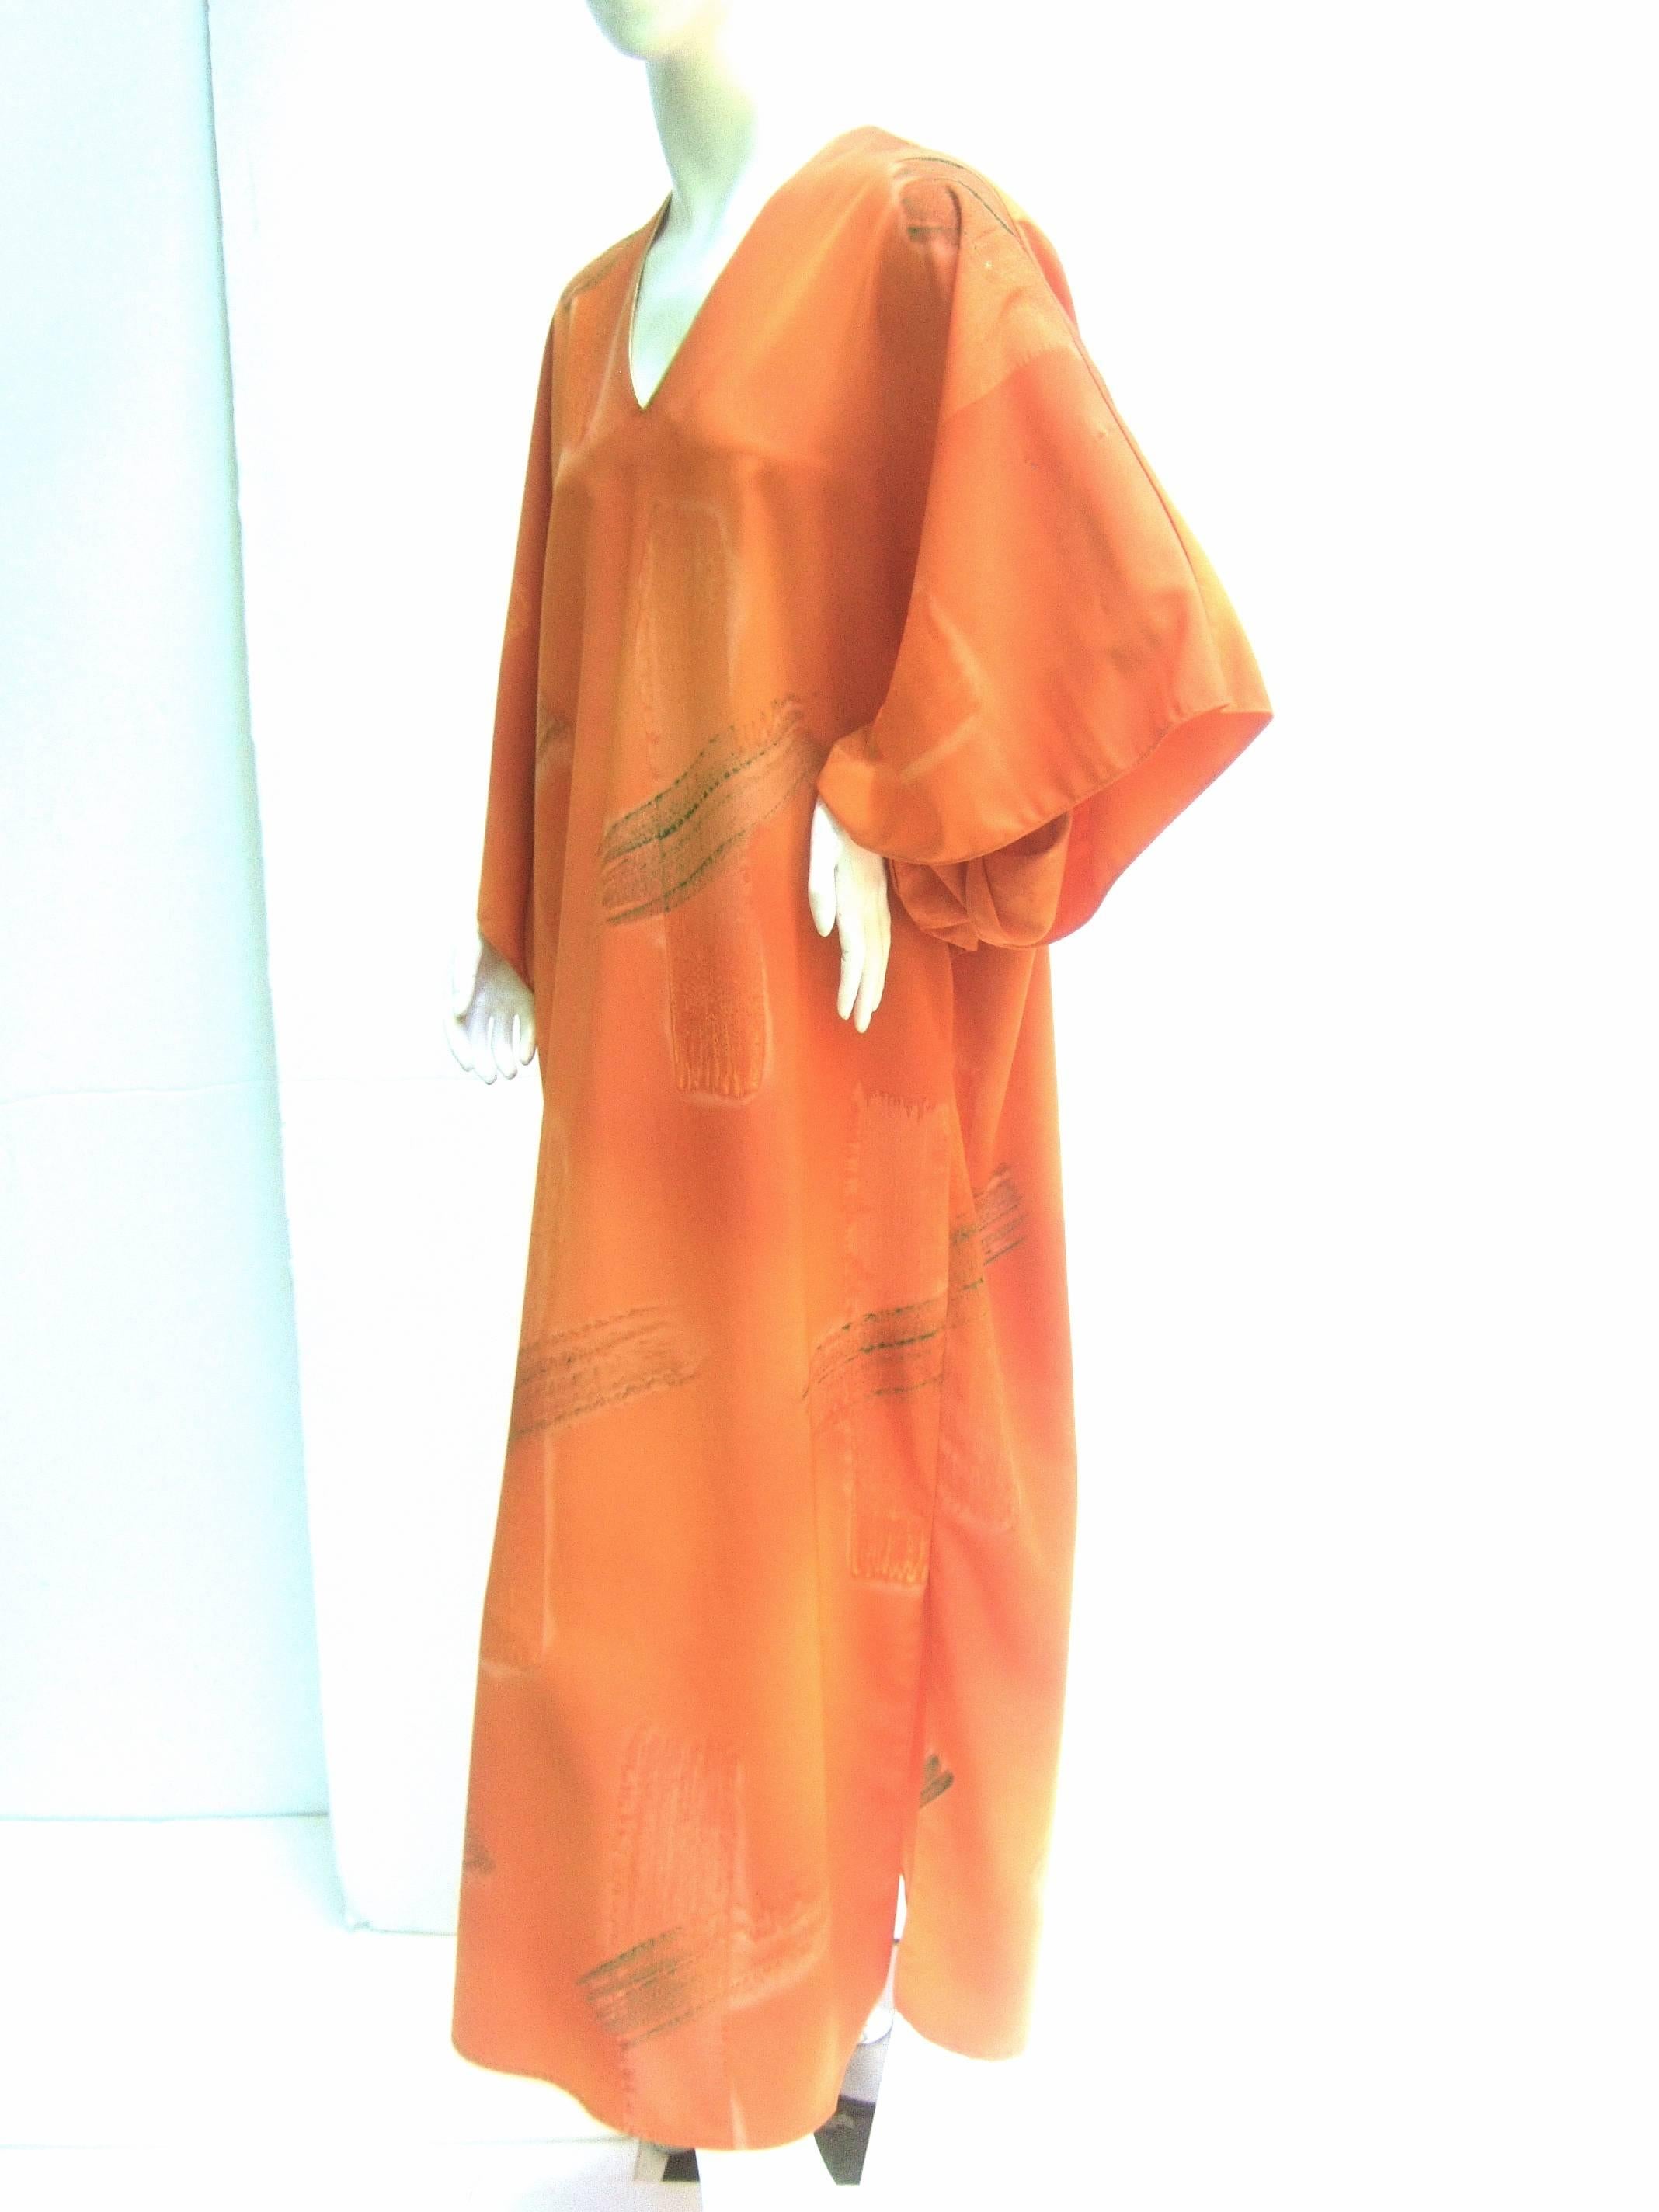 Reserved Sale Pending Chic Tangerine Caftan Lounge Gown for Neiman Marcus c 1990 3